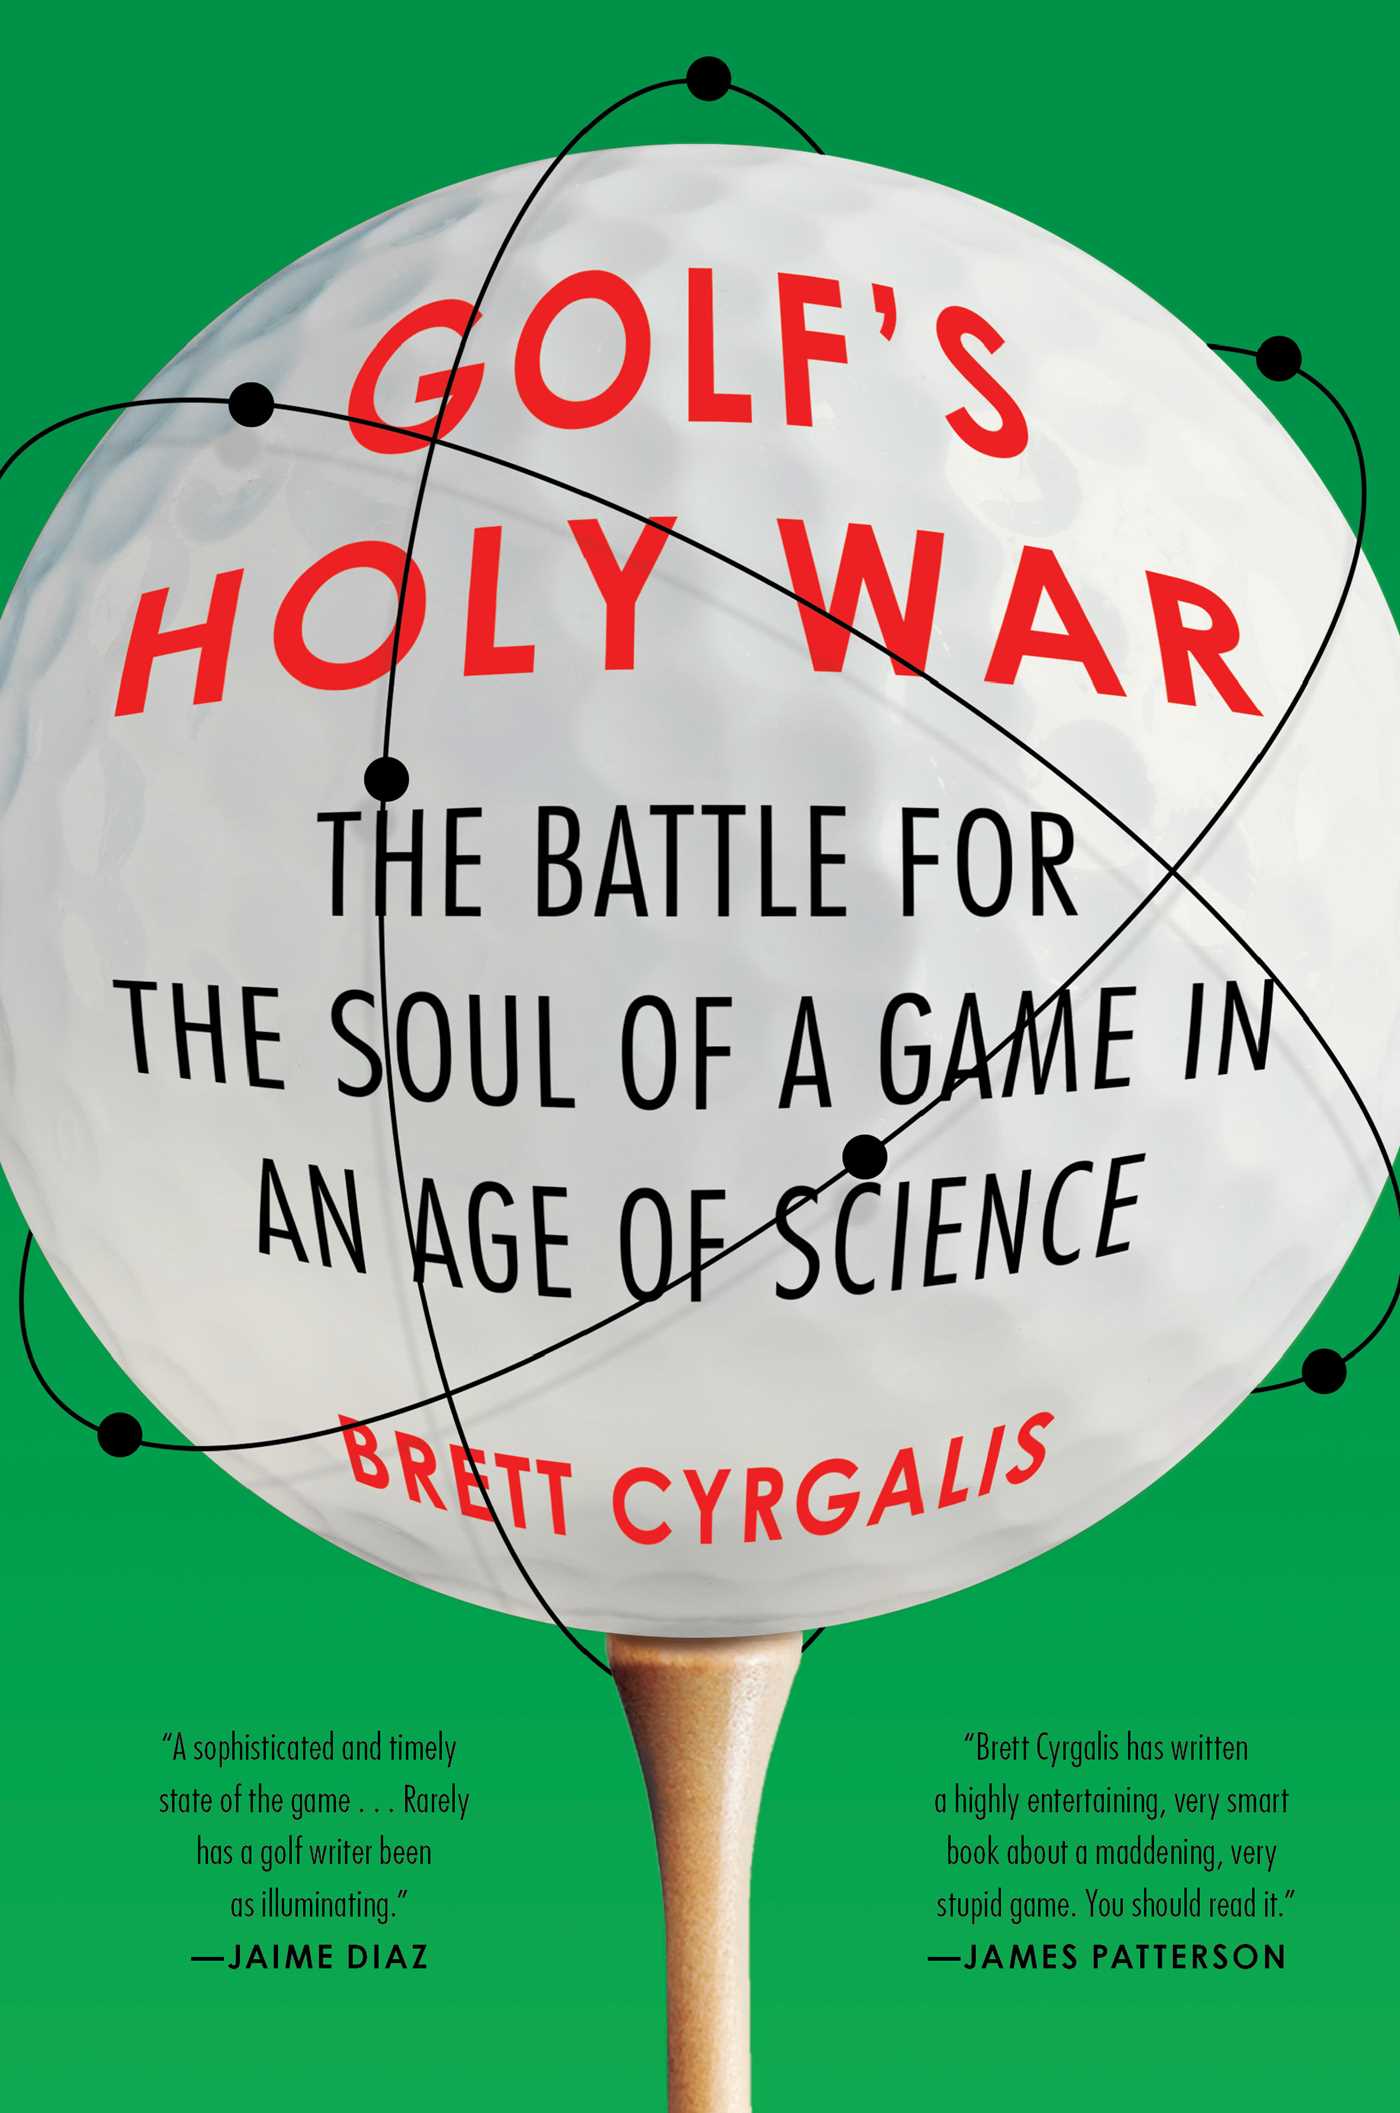 Image for "Golf's Holy War"